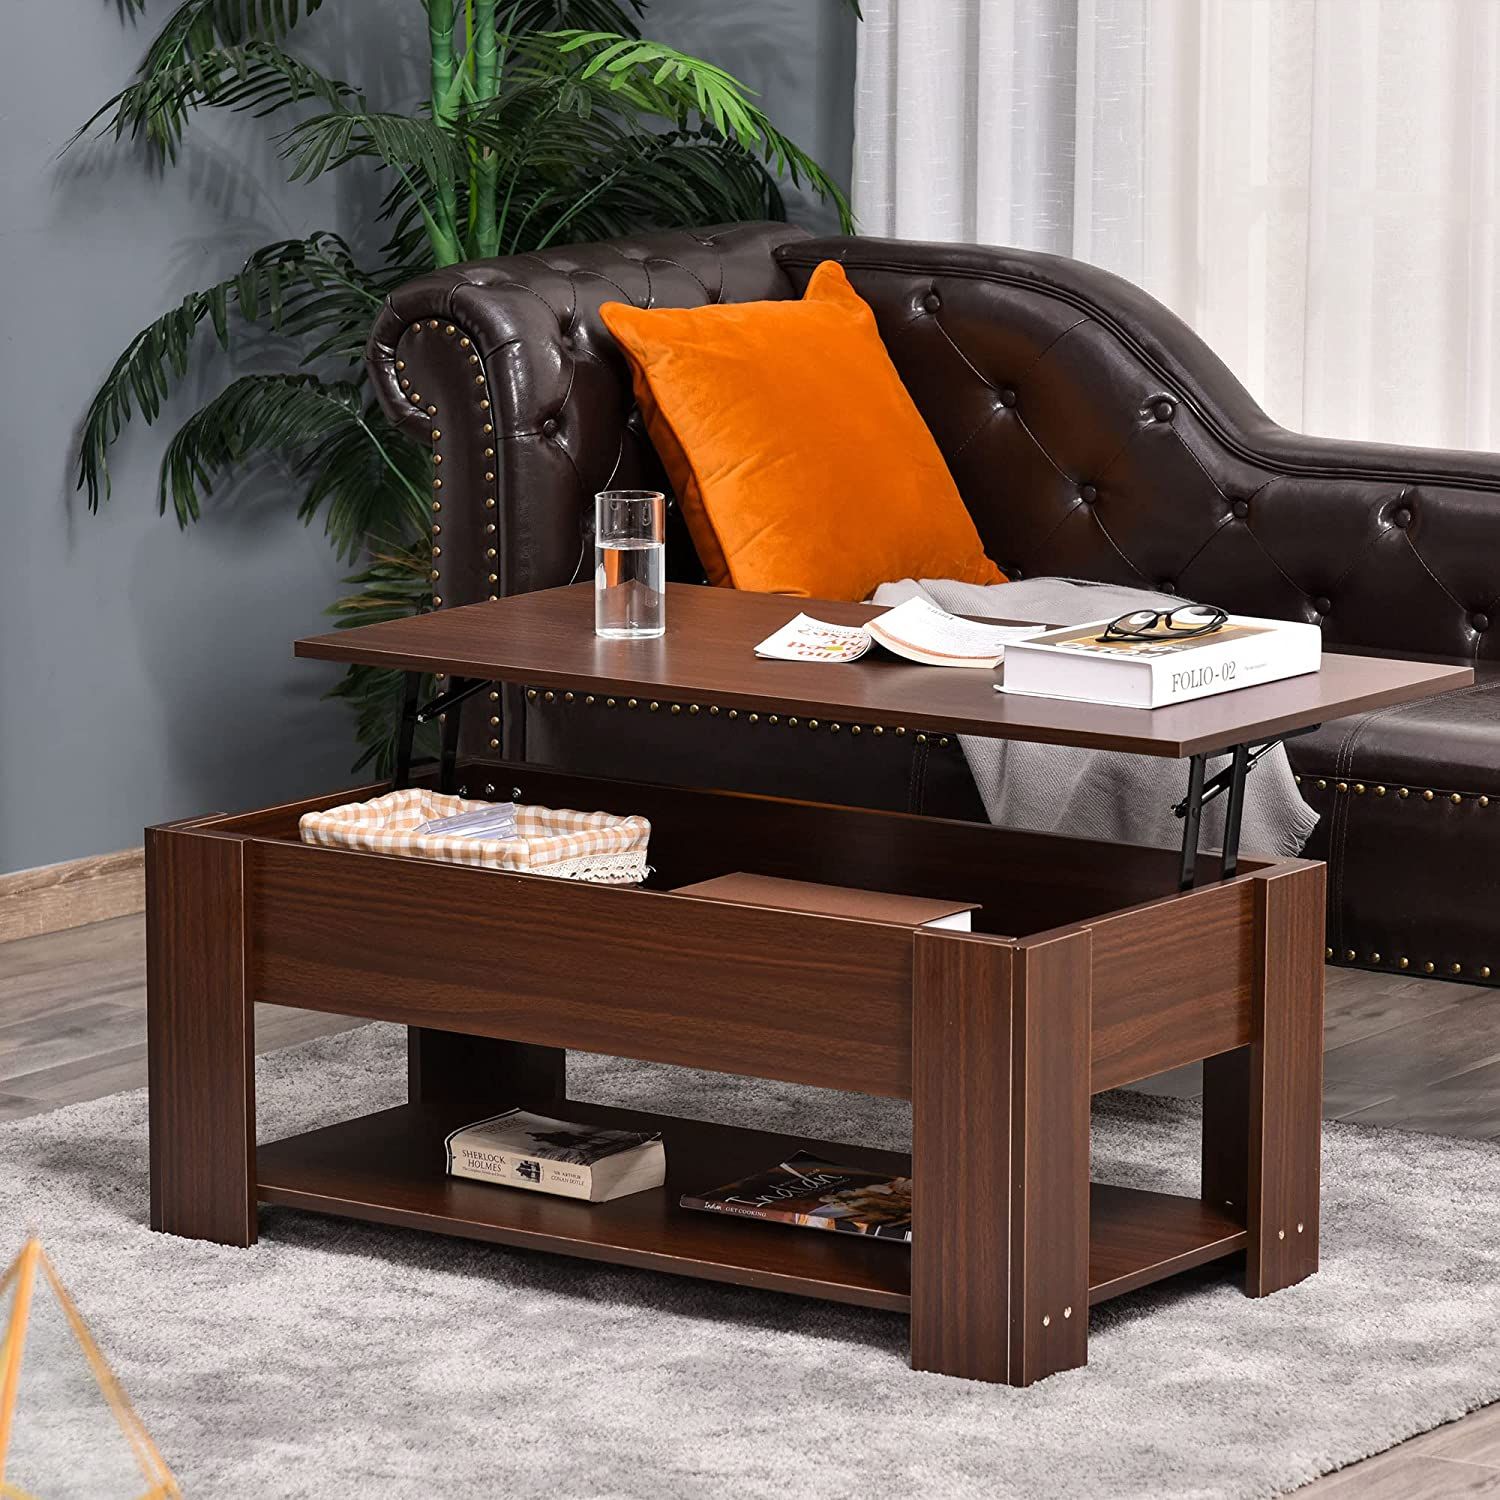 Lift Top Coffee Table With Hidden Storage Compartment And Open Shelf, Pop  Up Coffee Table For Living Room, Brown – Walmart Inside Open Shelf Coffee Tables (View 7 of 15)